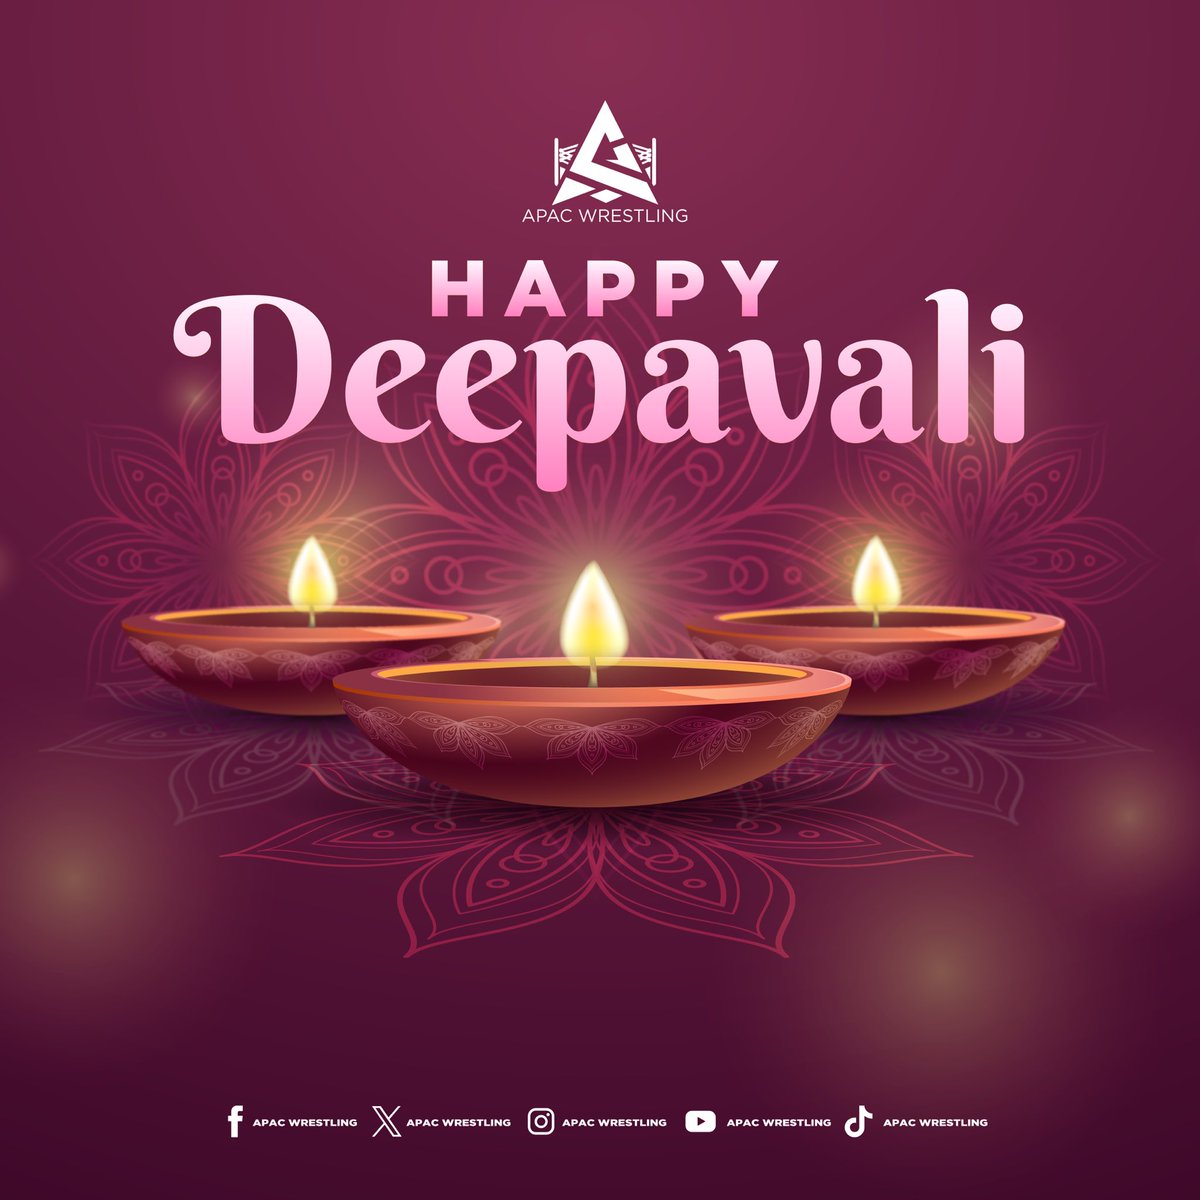 May the power of the ring light up your lives with joy and triumph this Deepavali! Wishing the APAC Army a festival filled with victories and moments that sparkle as bright as our wrestling stars. Deepavali Valthukkal! 🪔💫 #APACWrestling #DeepavaliCelebration